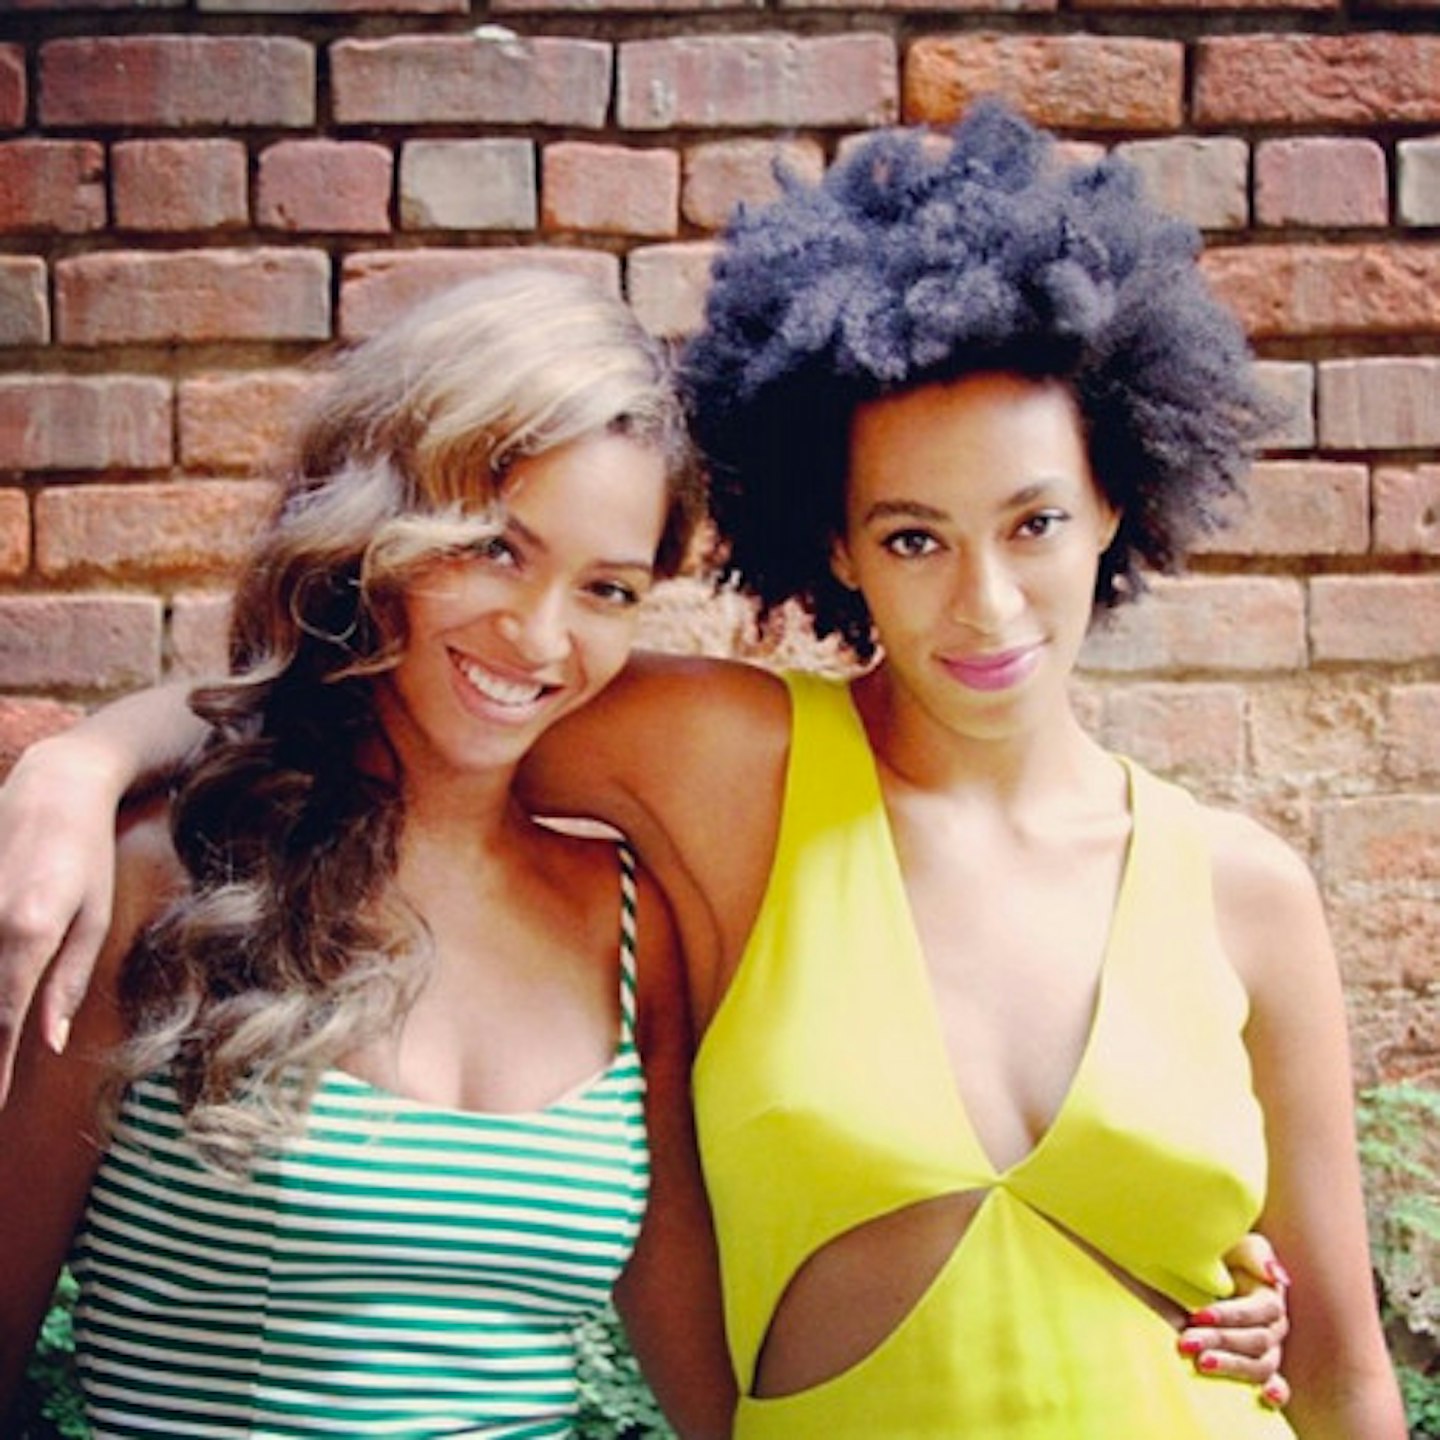 Solange should have let Beyonce deal with her own relationship